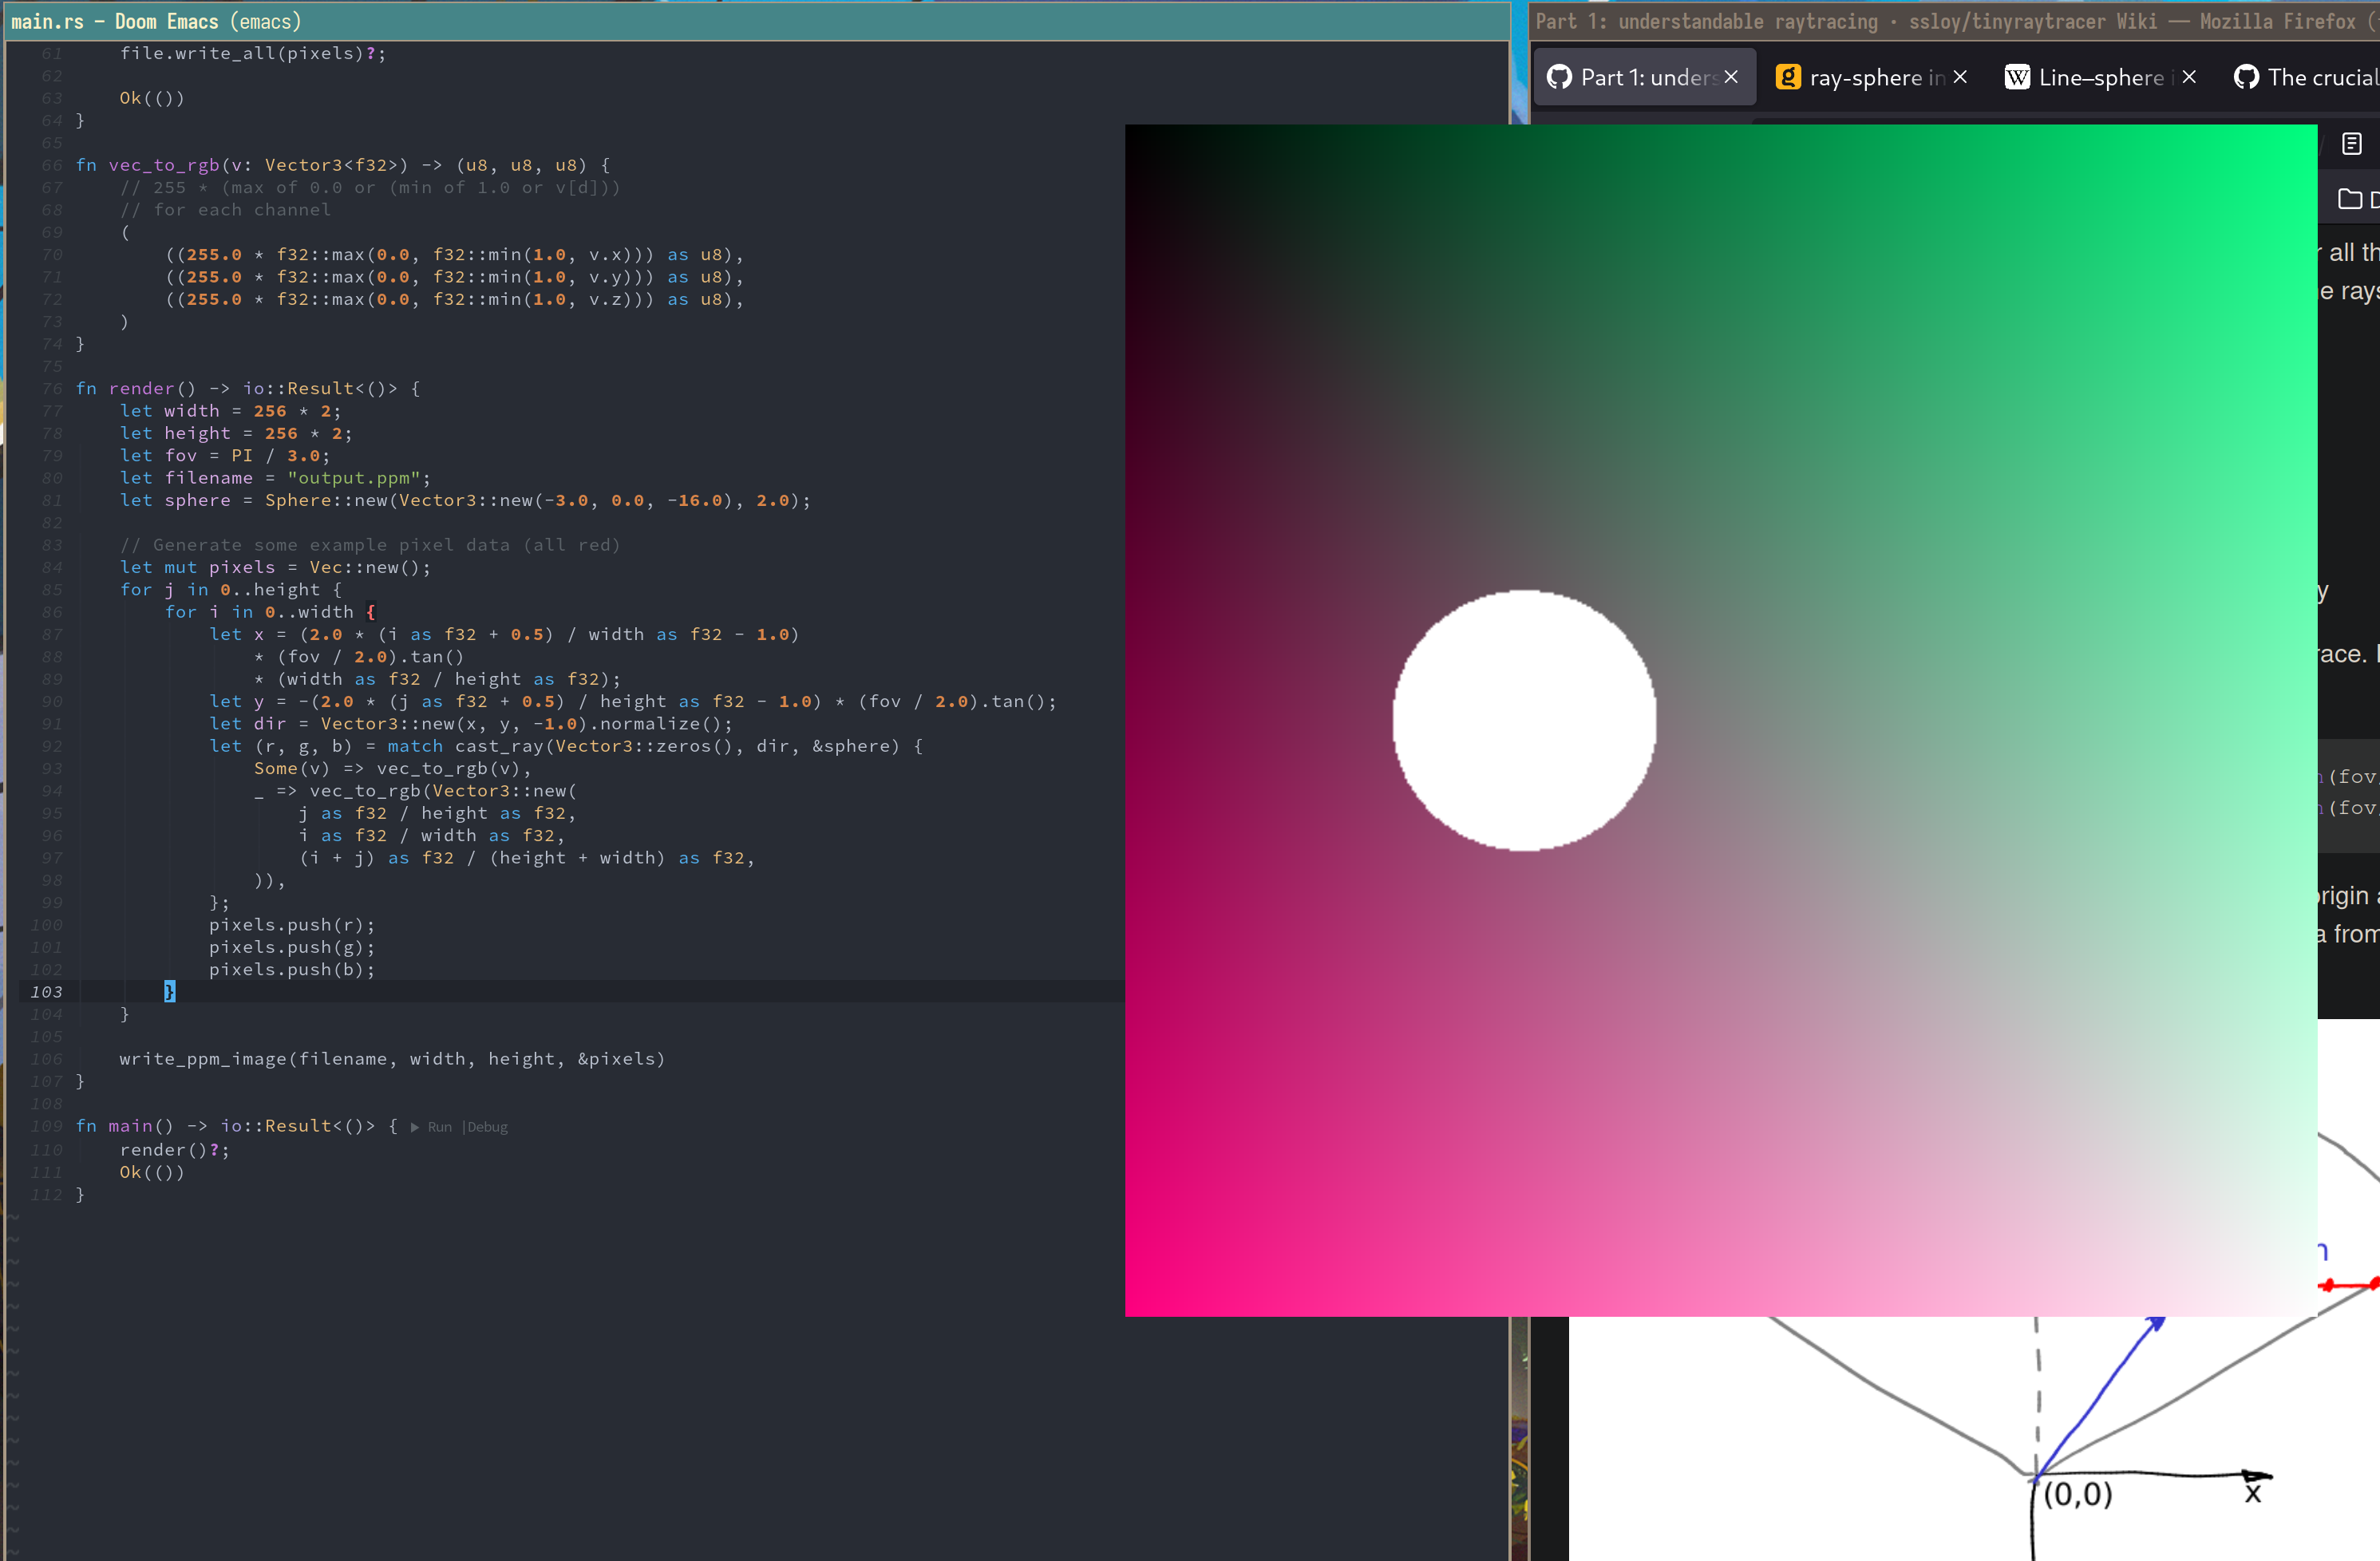 The output from my program, a white circle against a color gradient background